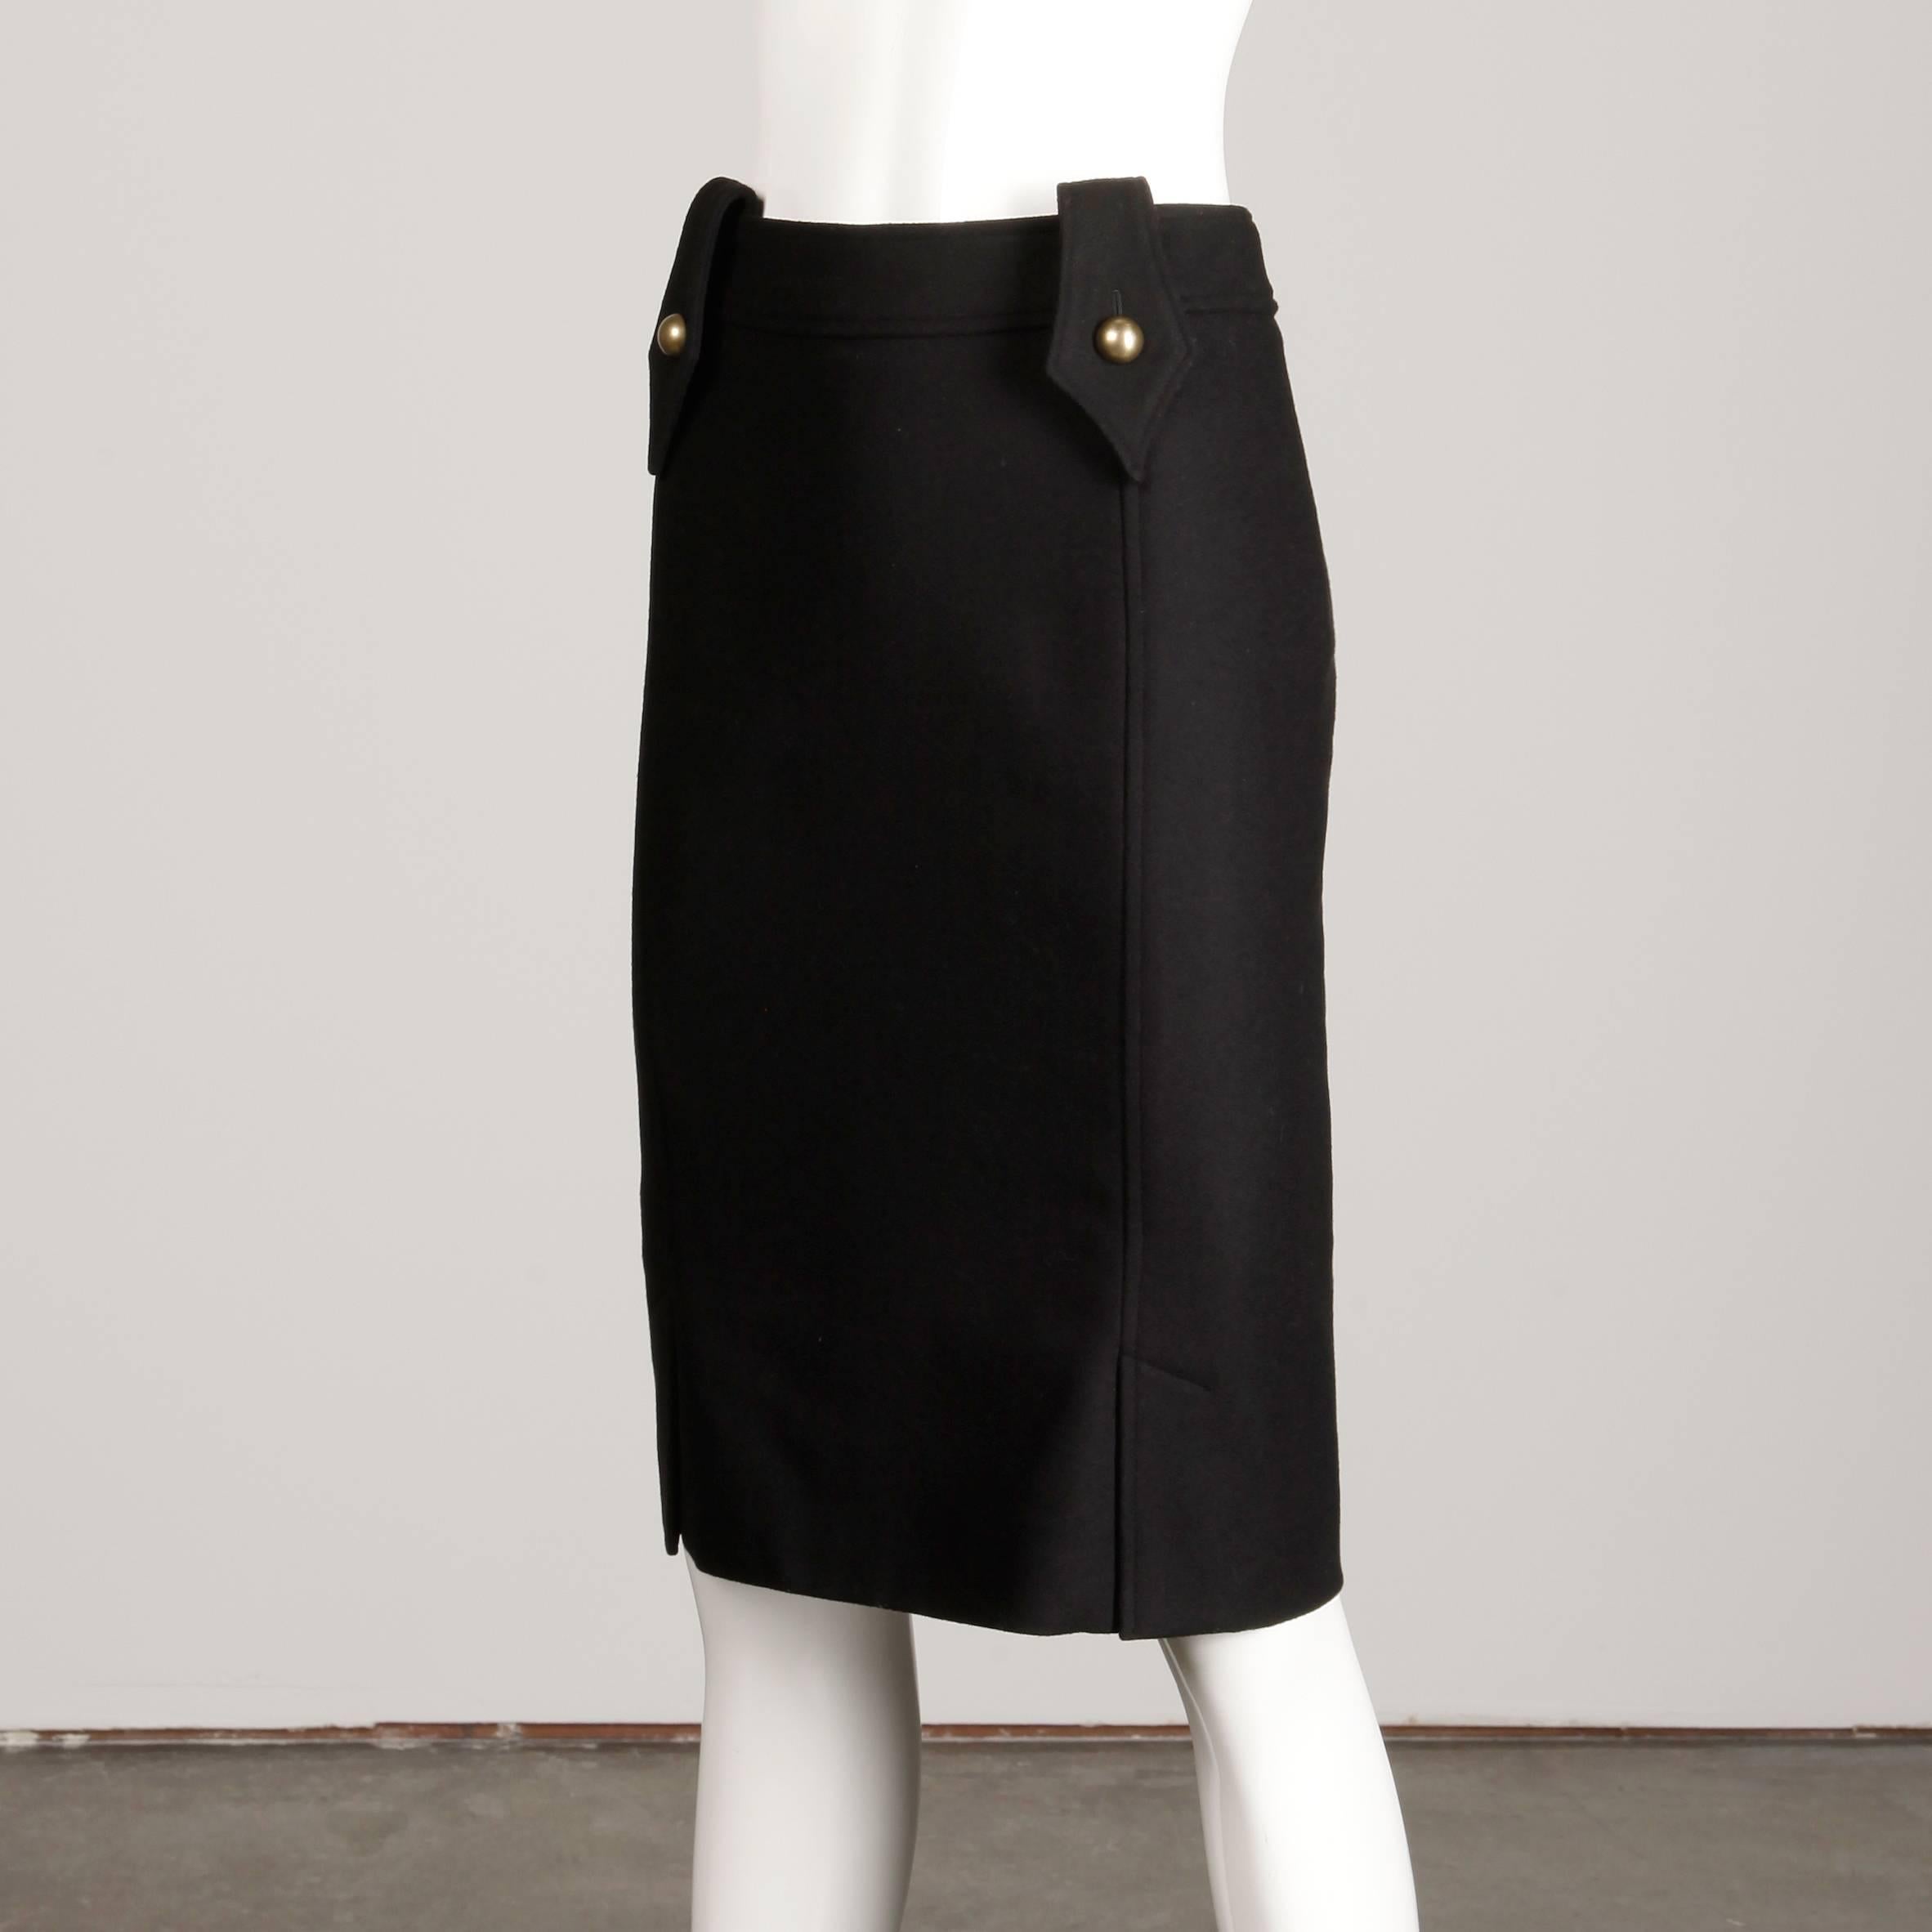 Simple and chic pencil skirt by Yves Saint Laurent in black wool. Fully lined with rear zip and hook closure. 97% wool, 3% spandex. The marked size is 36/ US4. The low waist measures 29.5